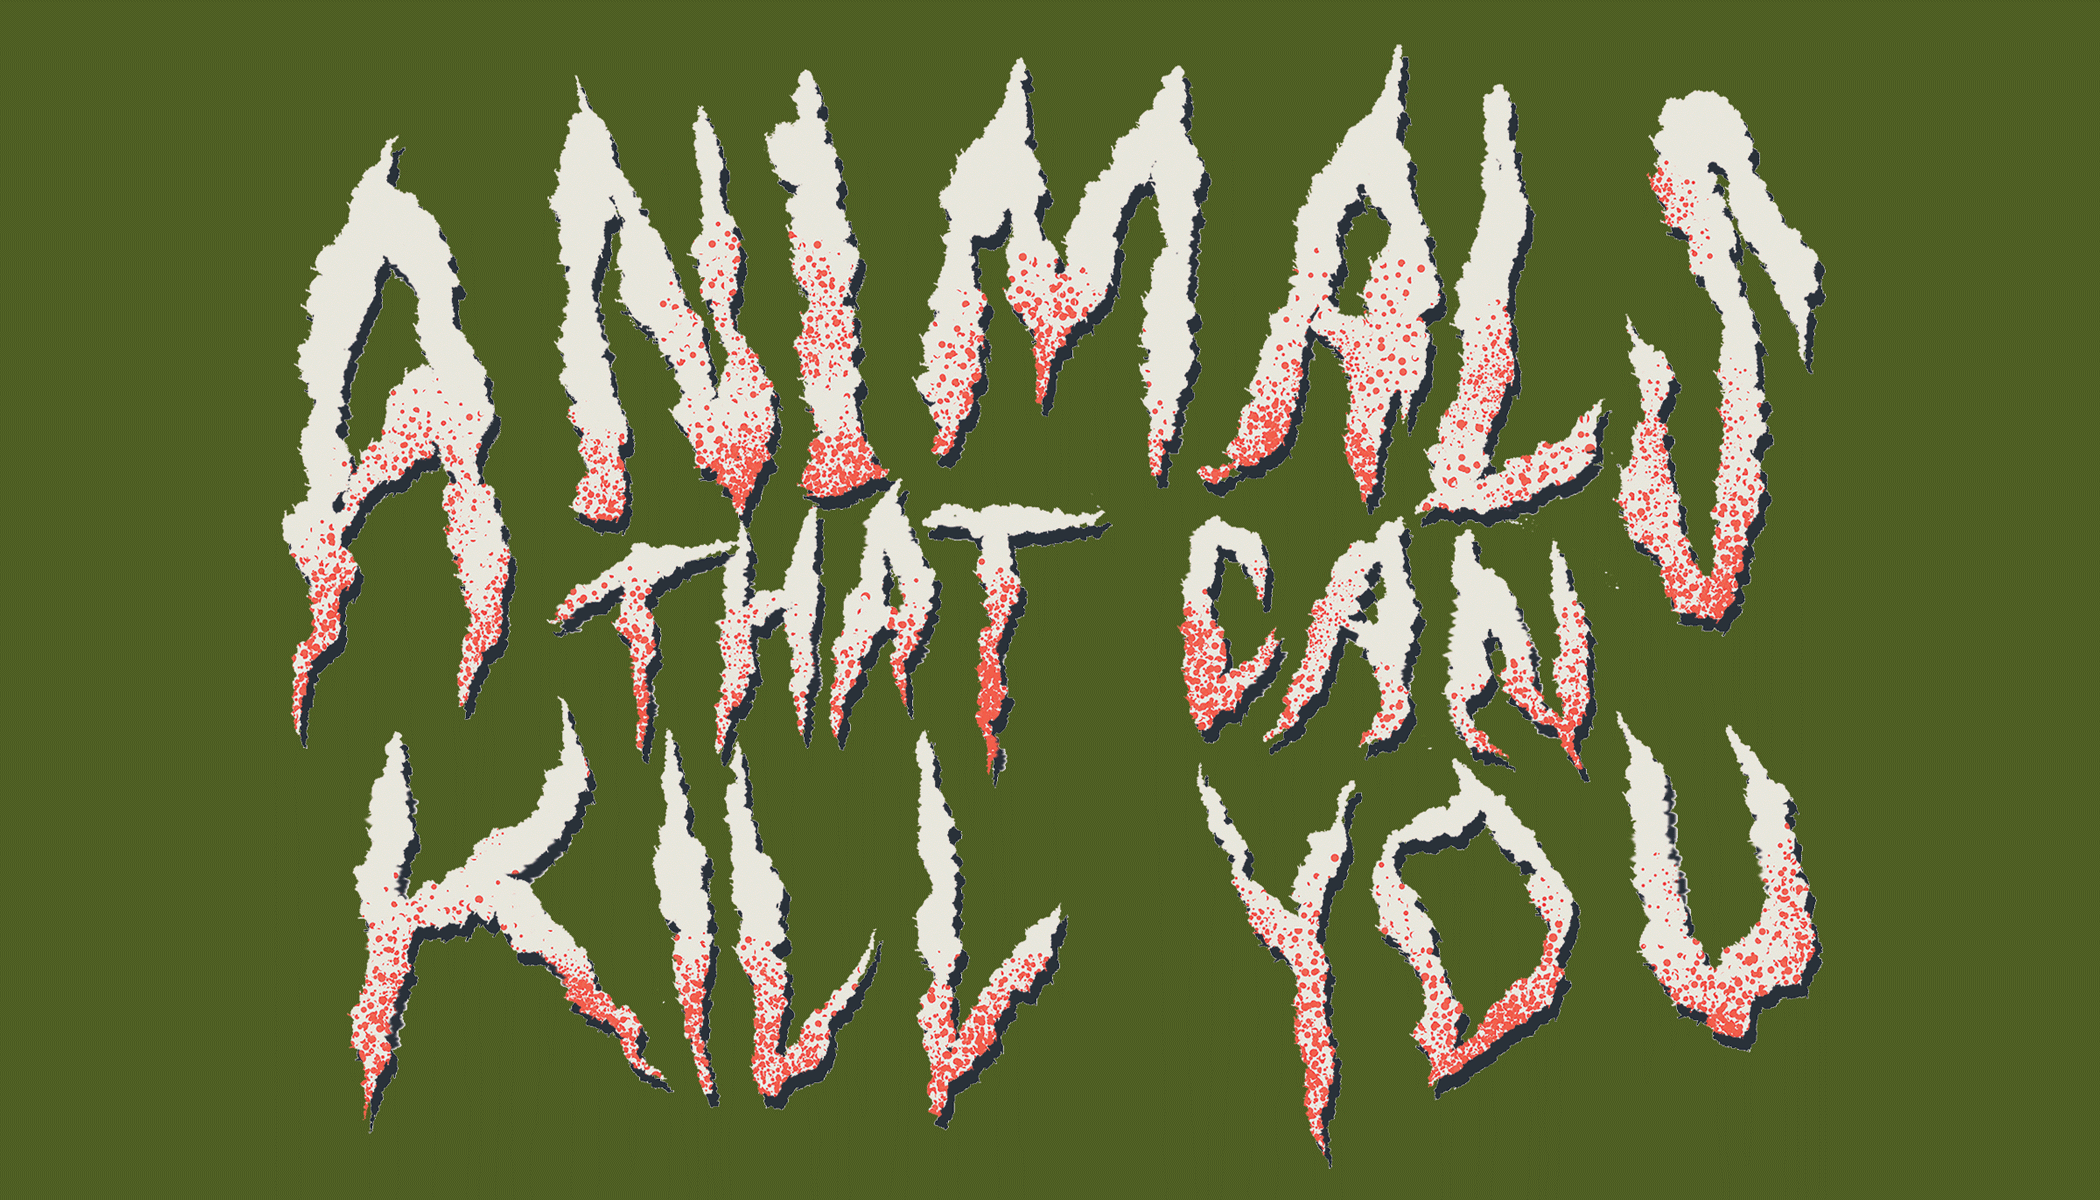 The words "Animals that can kill you" illustrated to look like claw marks against a green background.